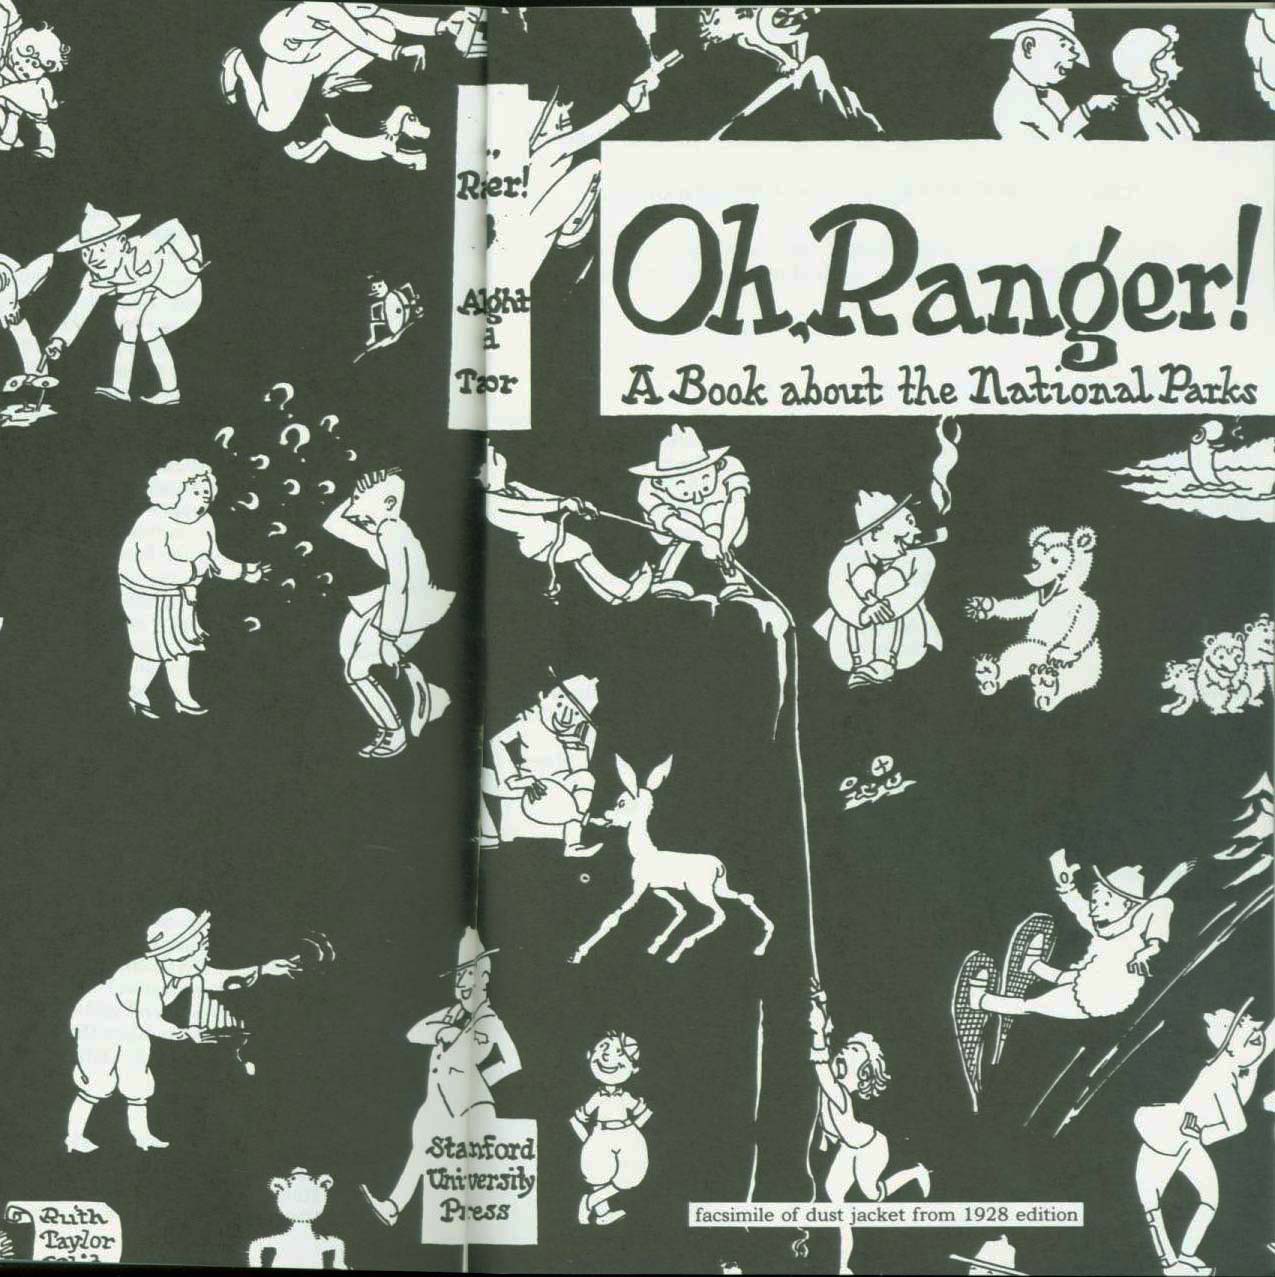 Oh, Ranger! a book about the national parks. vist0068h